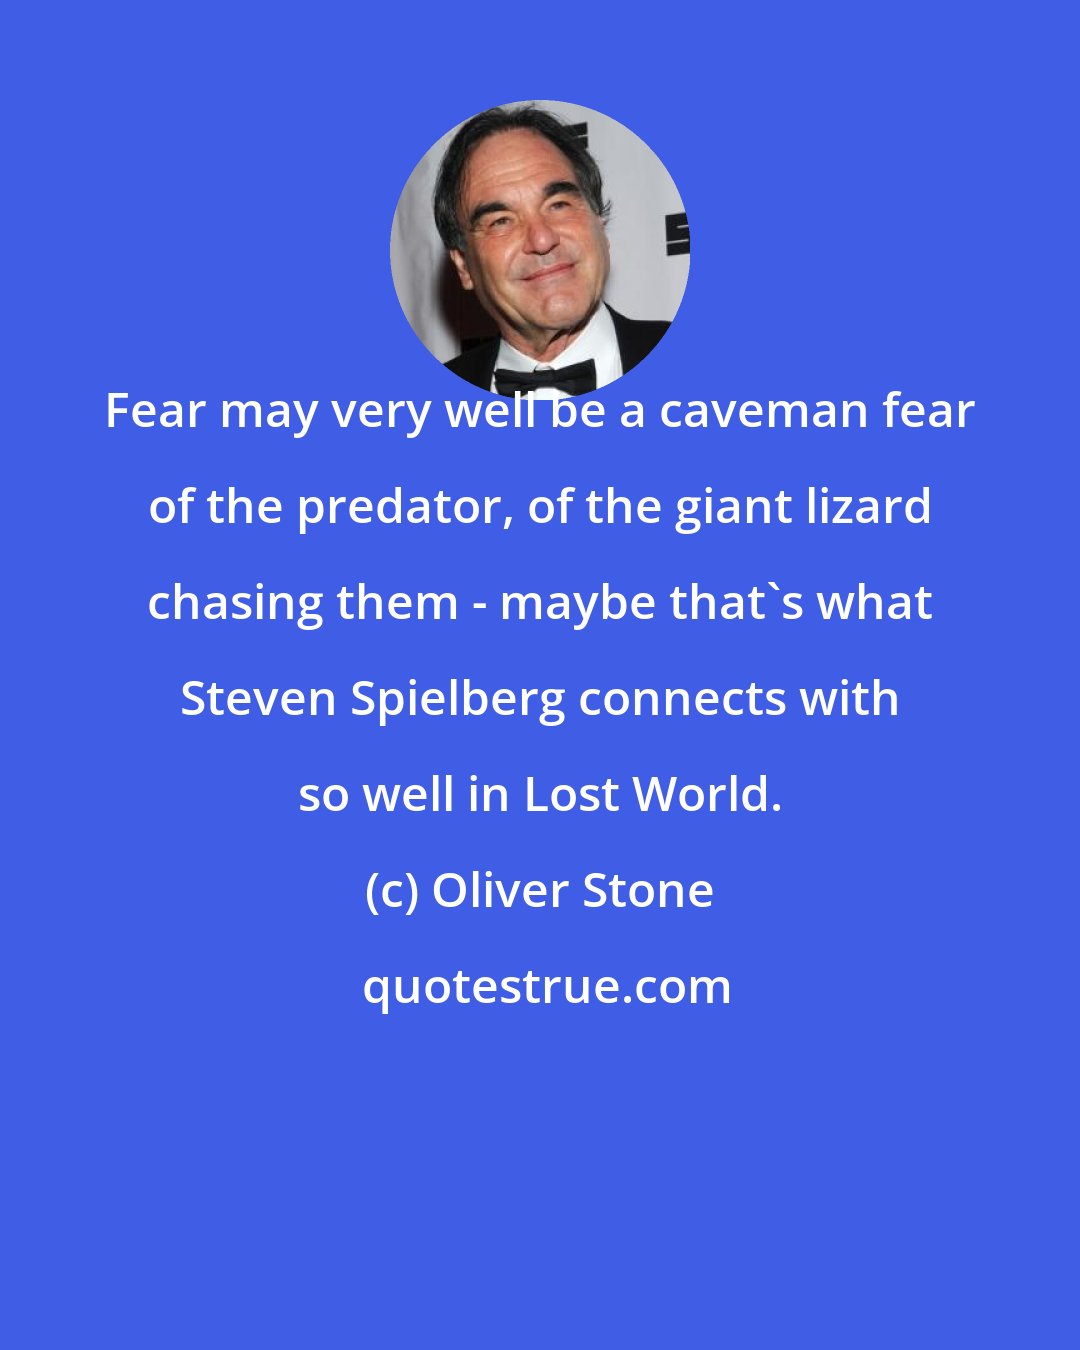 Oliver Stone: Fear may very well be a caveman fear of the predator, of the giant lizard chasing them - maybe that's what Steven Spielberg connects with so well in Lost World.